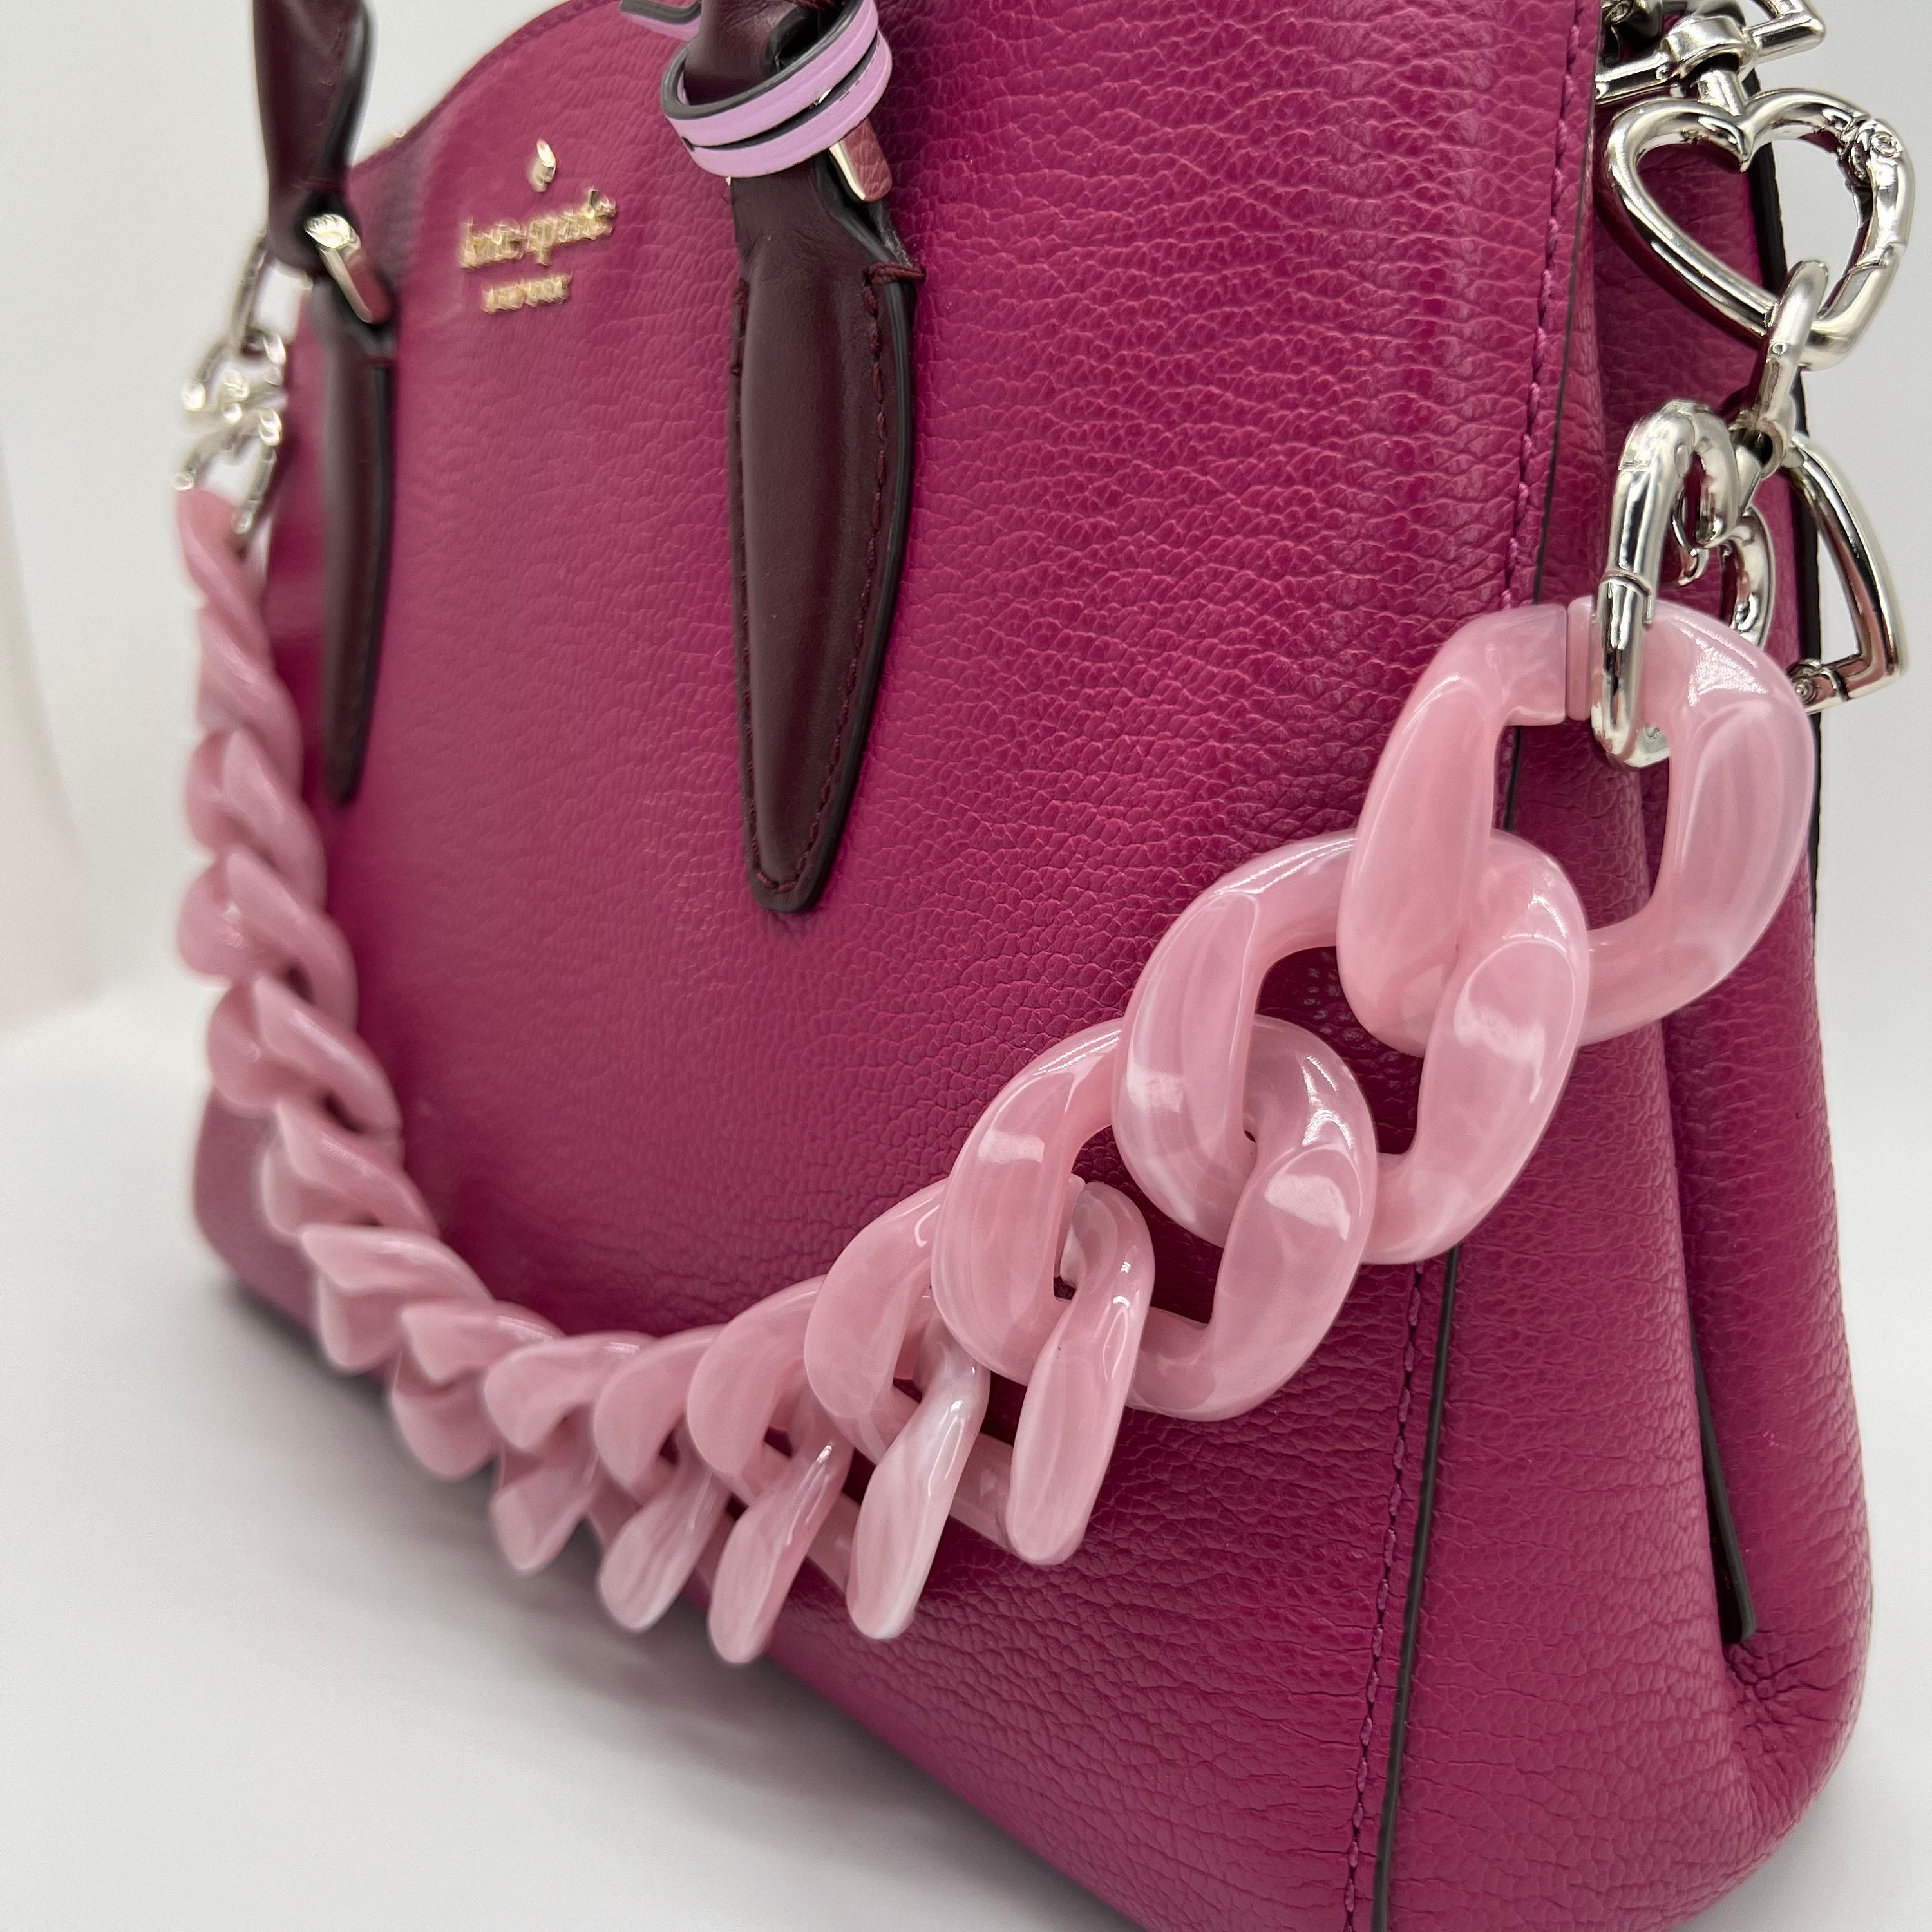 Designer Leather Crossbody Bag With Gold Sling Chain 18CM Fashion Shoulder  Hot Pink Purse Strap For Women From Tote_bag902, $31.2